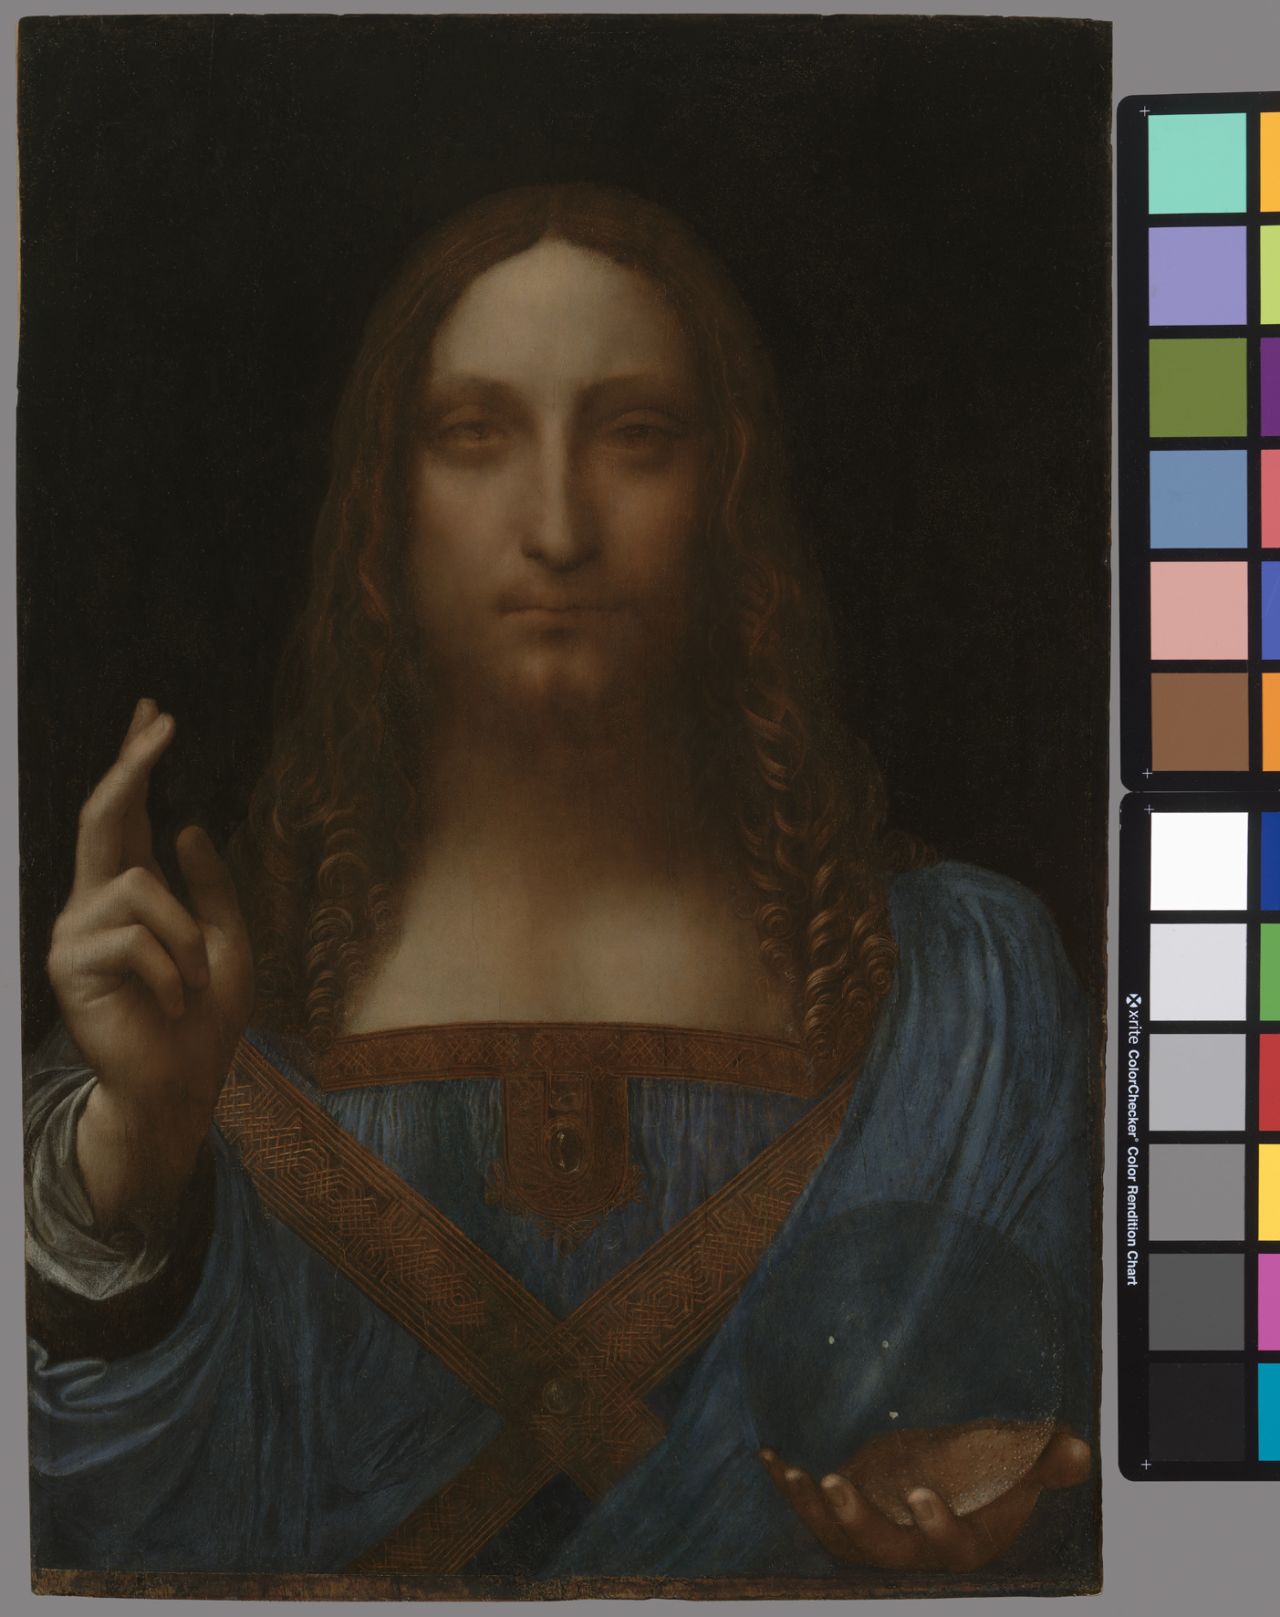 The restoration work to the "Salvator Mundi" involed cleaning off layers of varnish and over-paint, repairing a crack in the wood panel and re-touching damaged areas of the painting. 